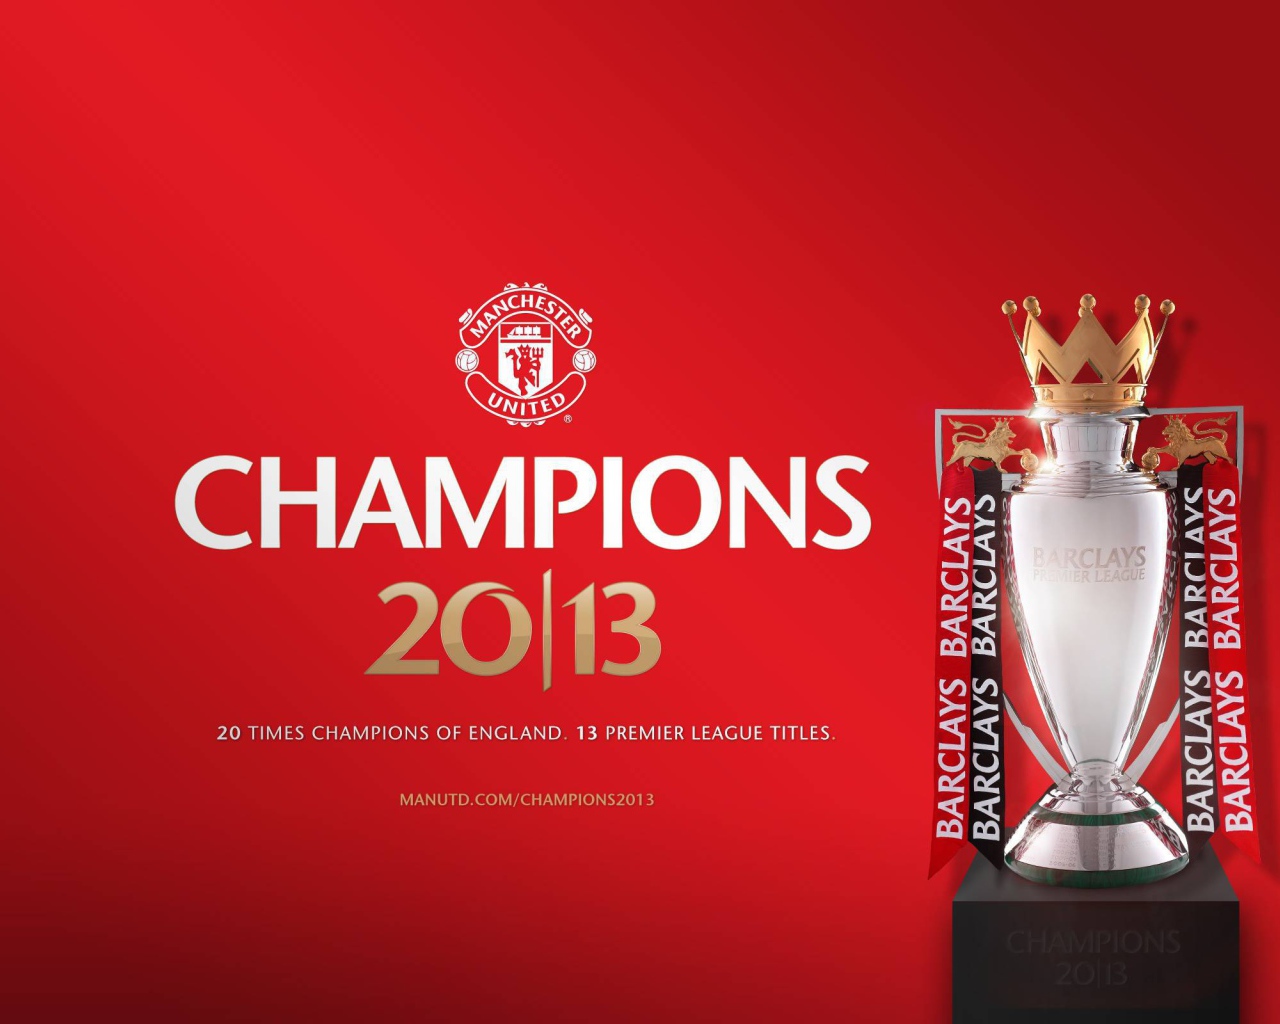 The popular football club of england Manchester United